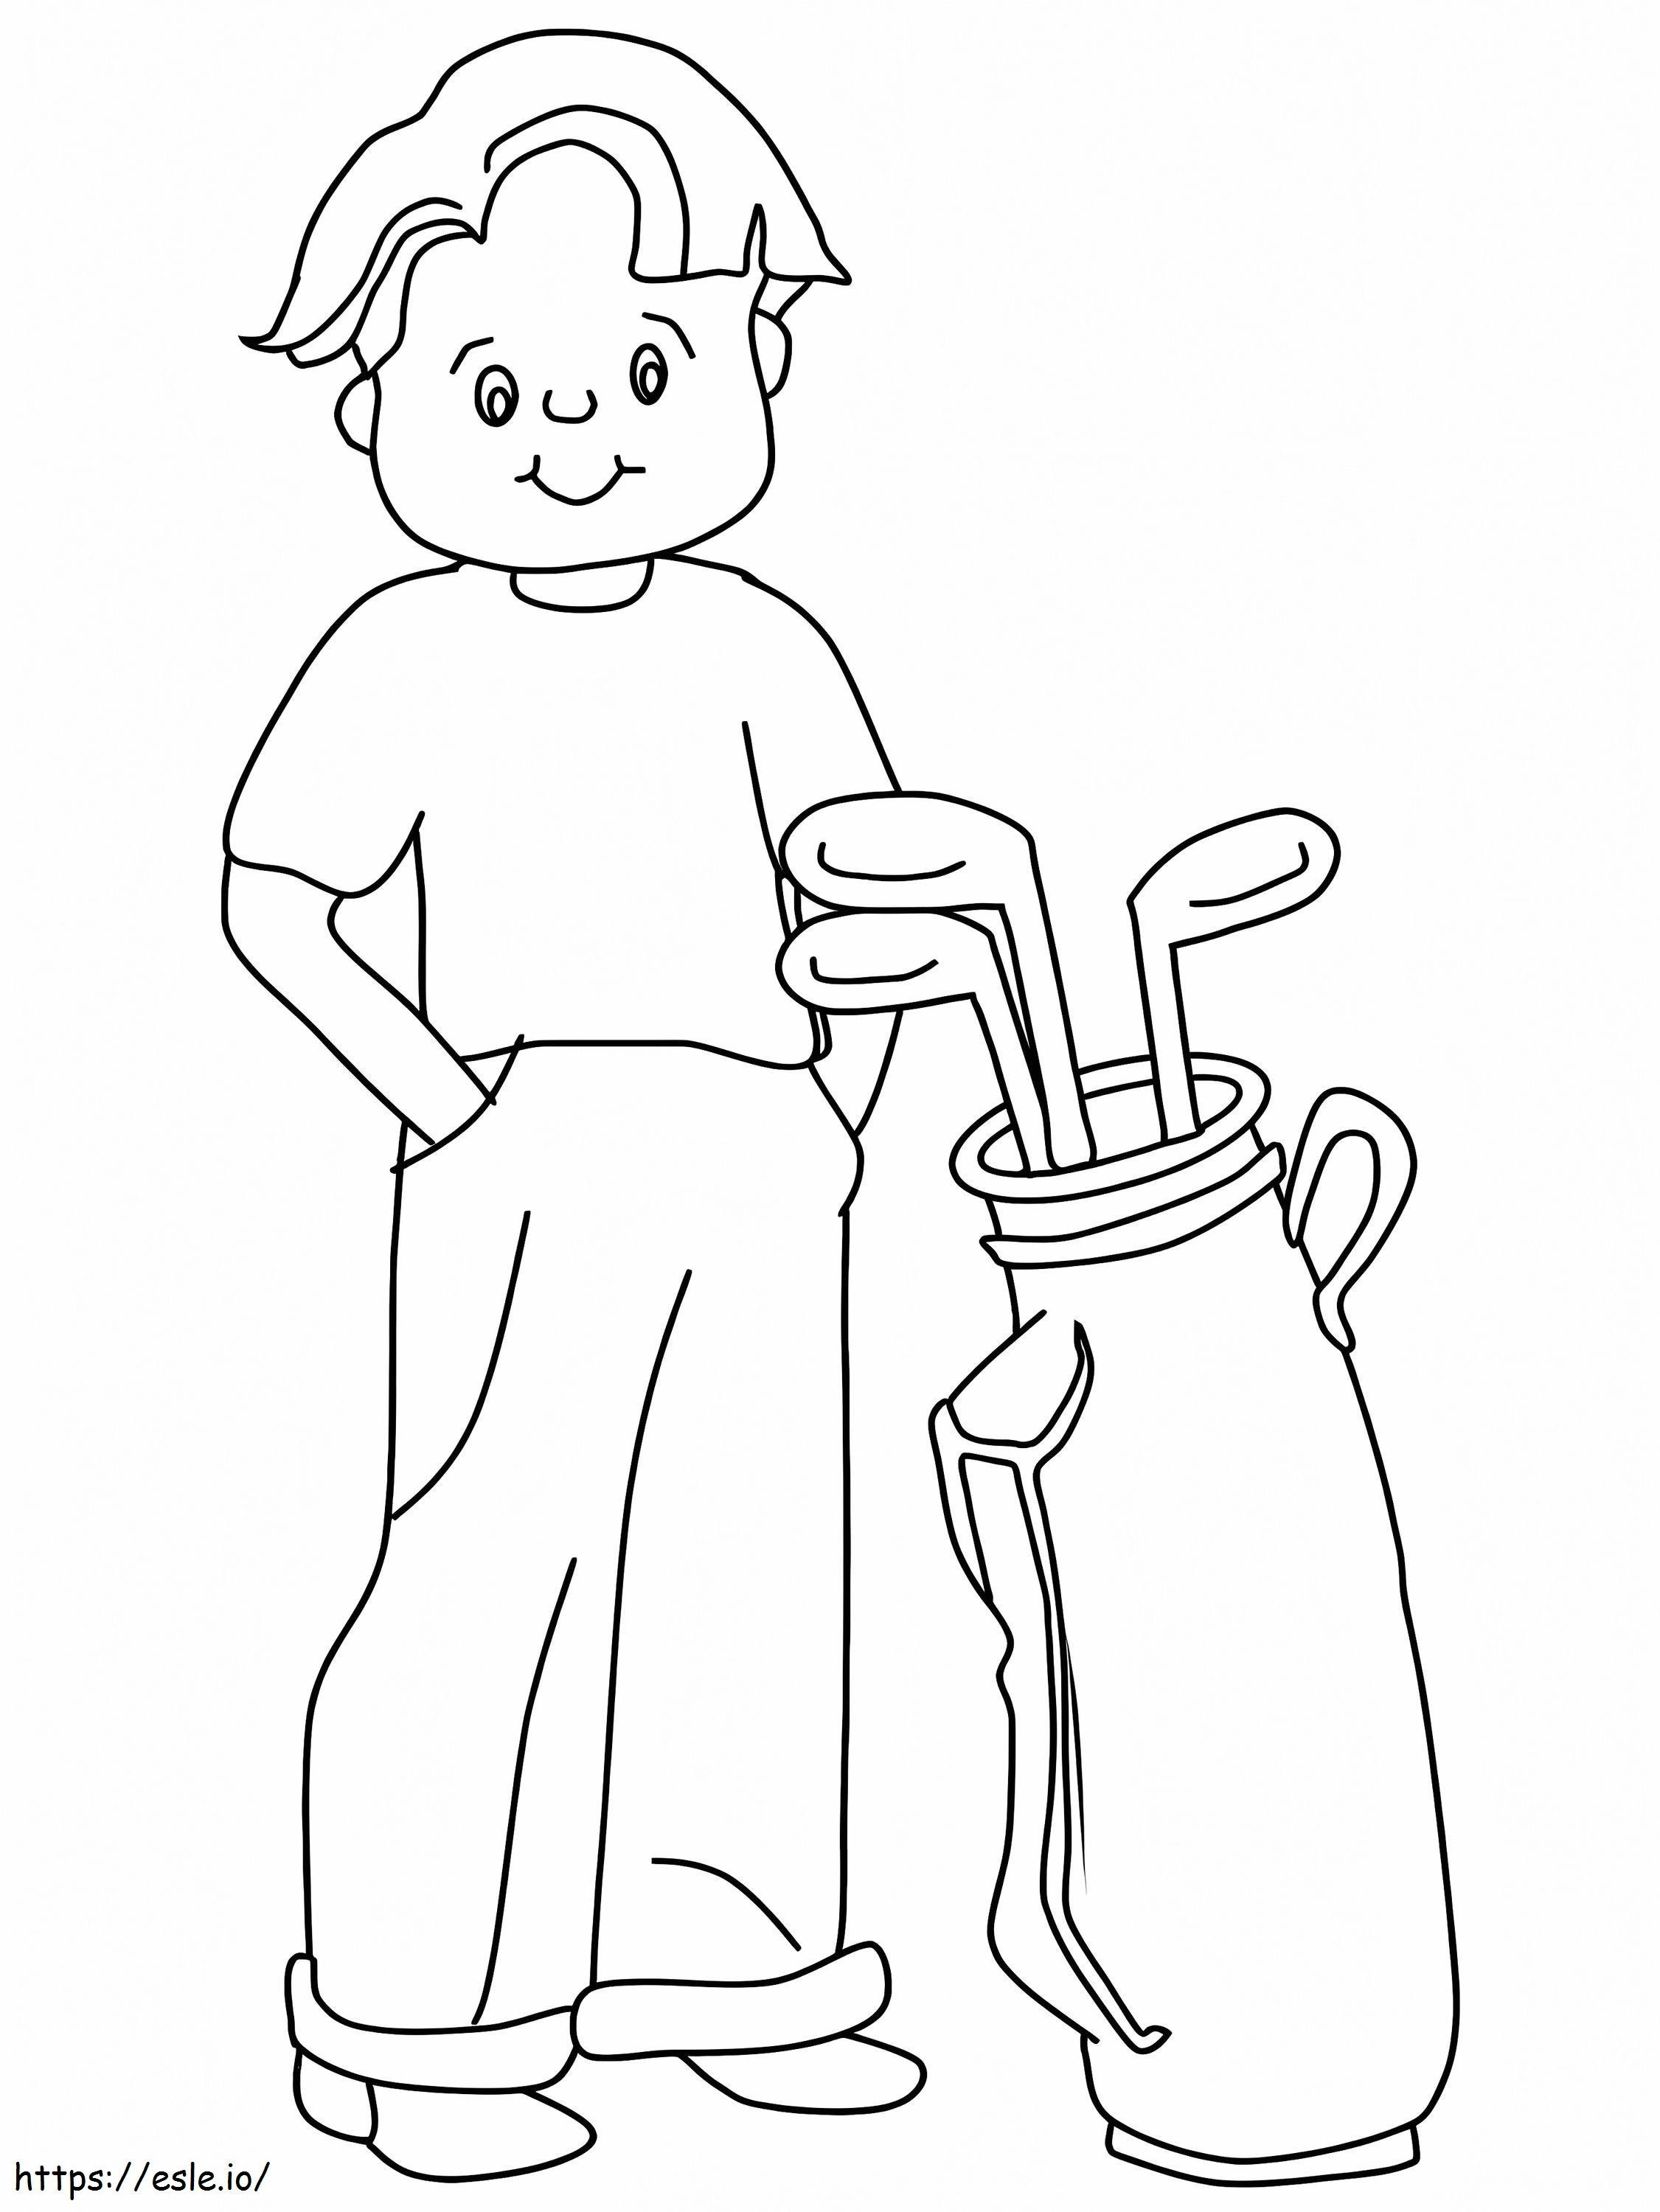 Young Boy Playing Golf coloring page